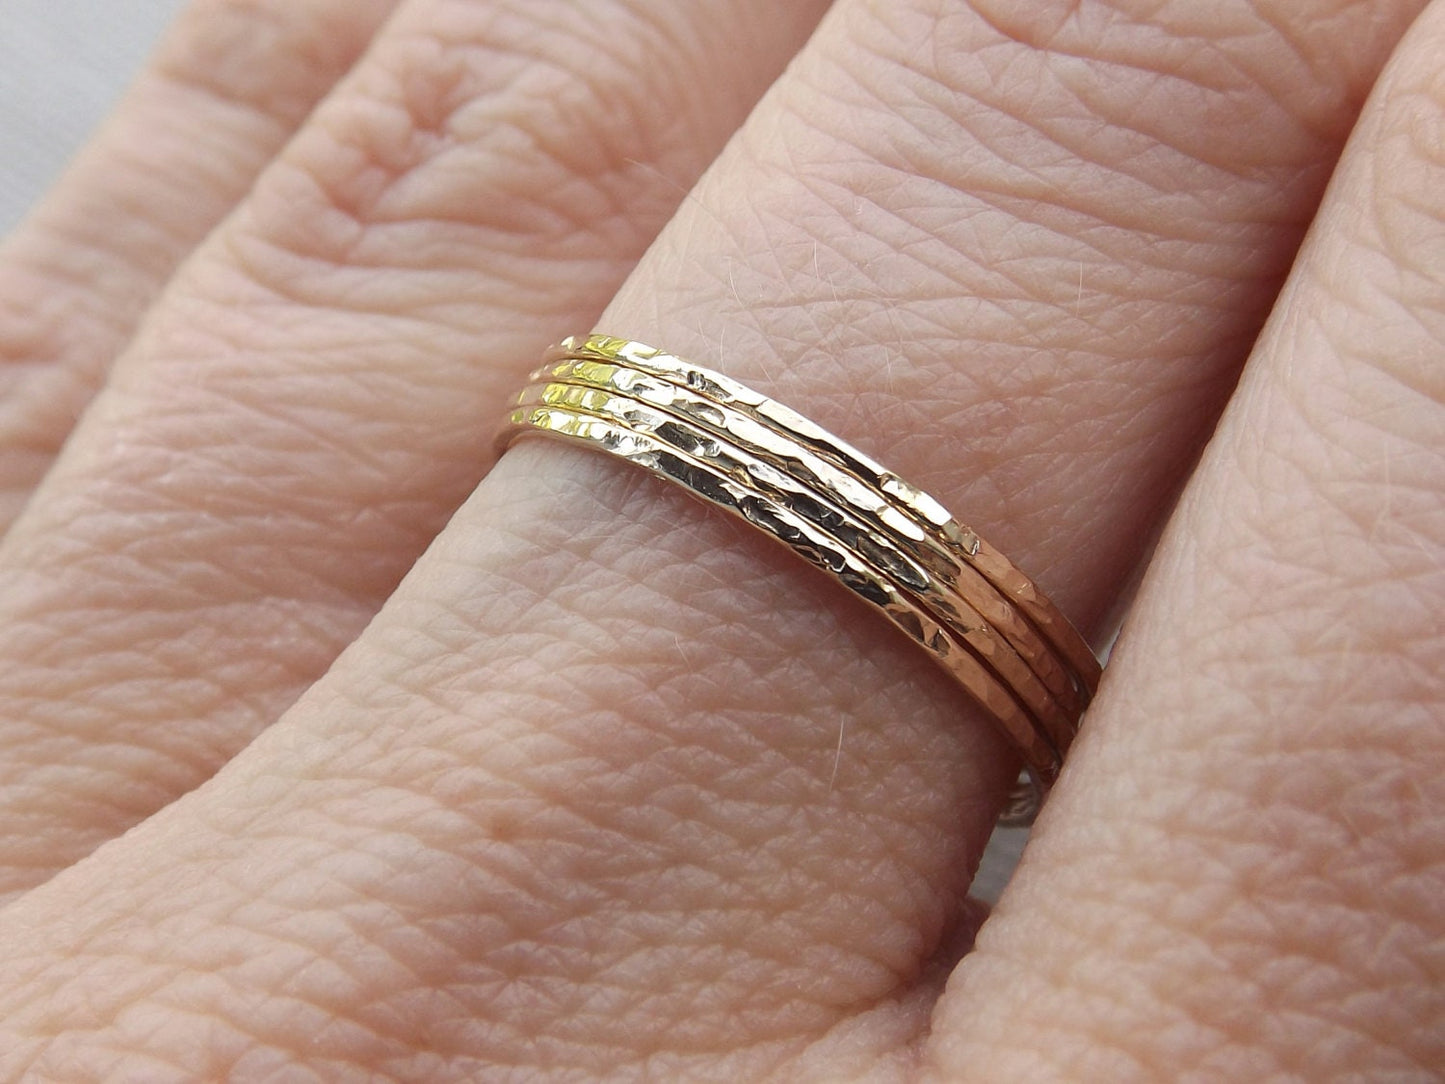 Build A Set!Super Skinny Stacking,Knuckle, or Thumb Rings,Gold Rings,Stacking Rings,Knuckle Ring,Skinny Rings,Thin Rings, Hammered Ring